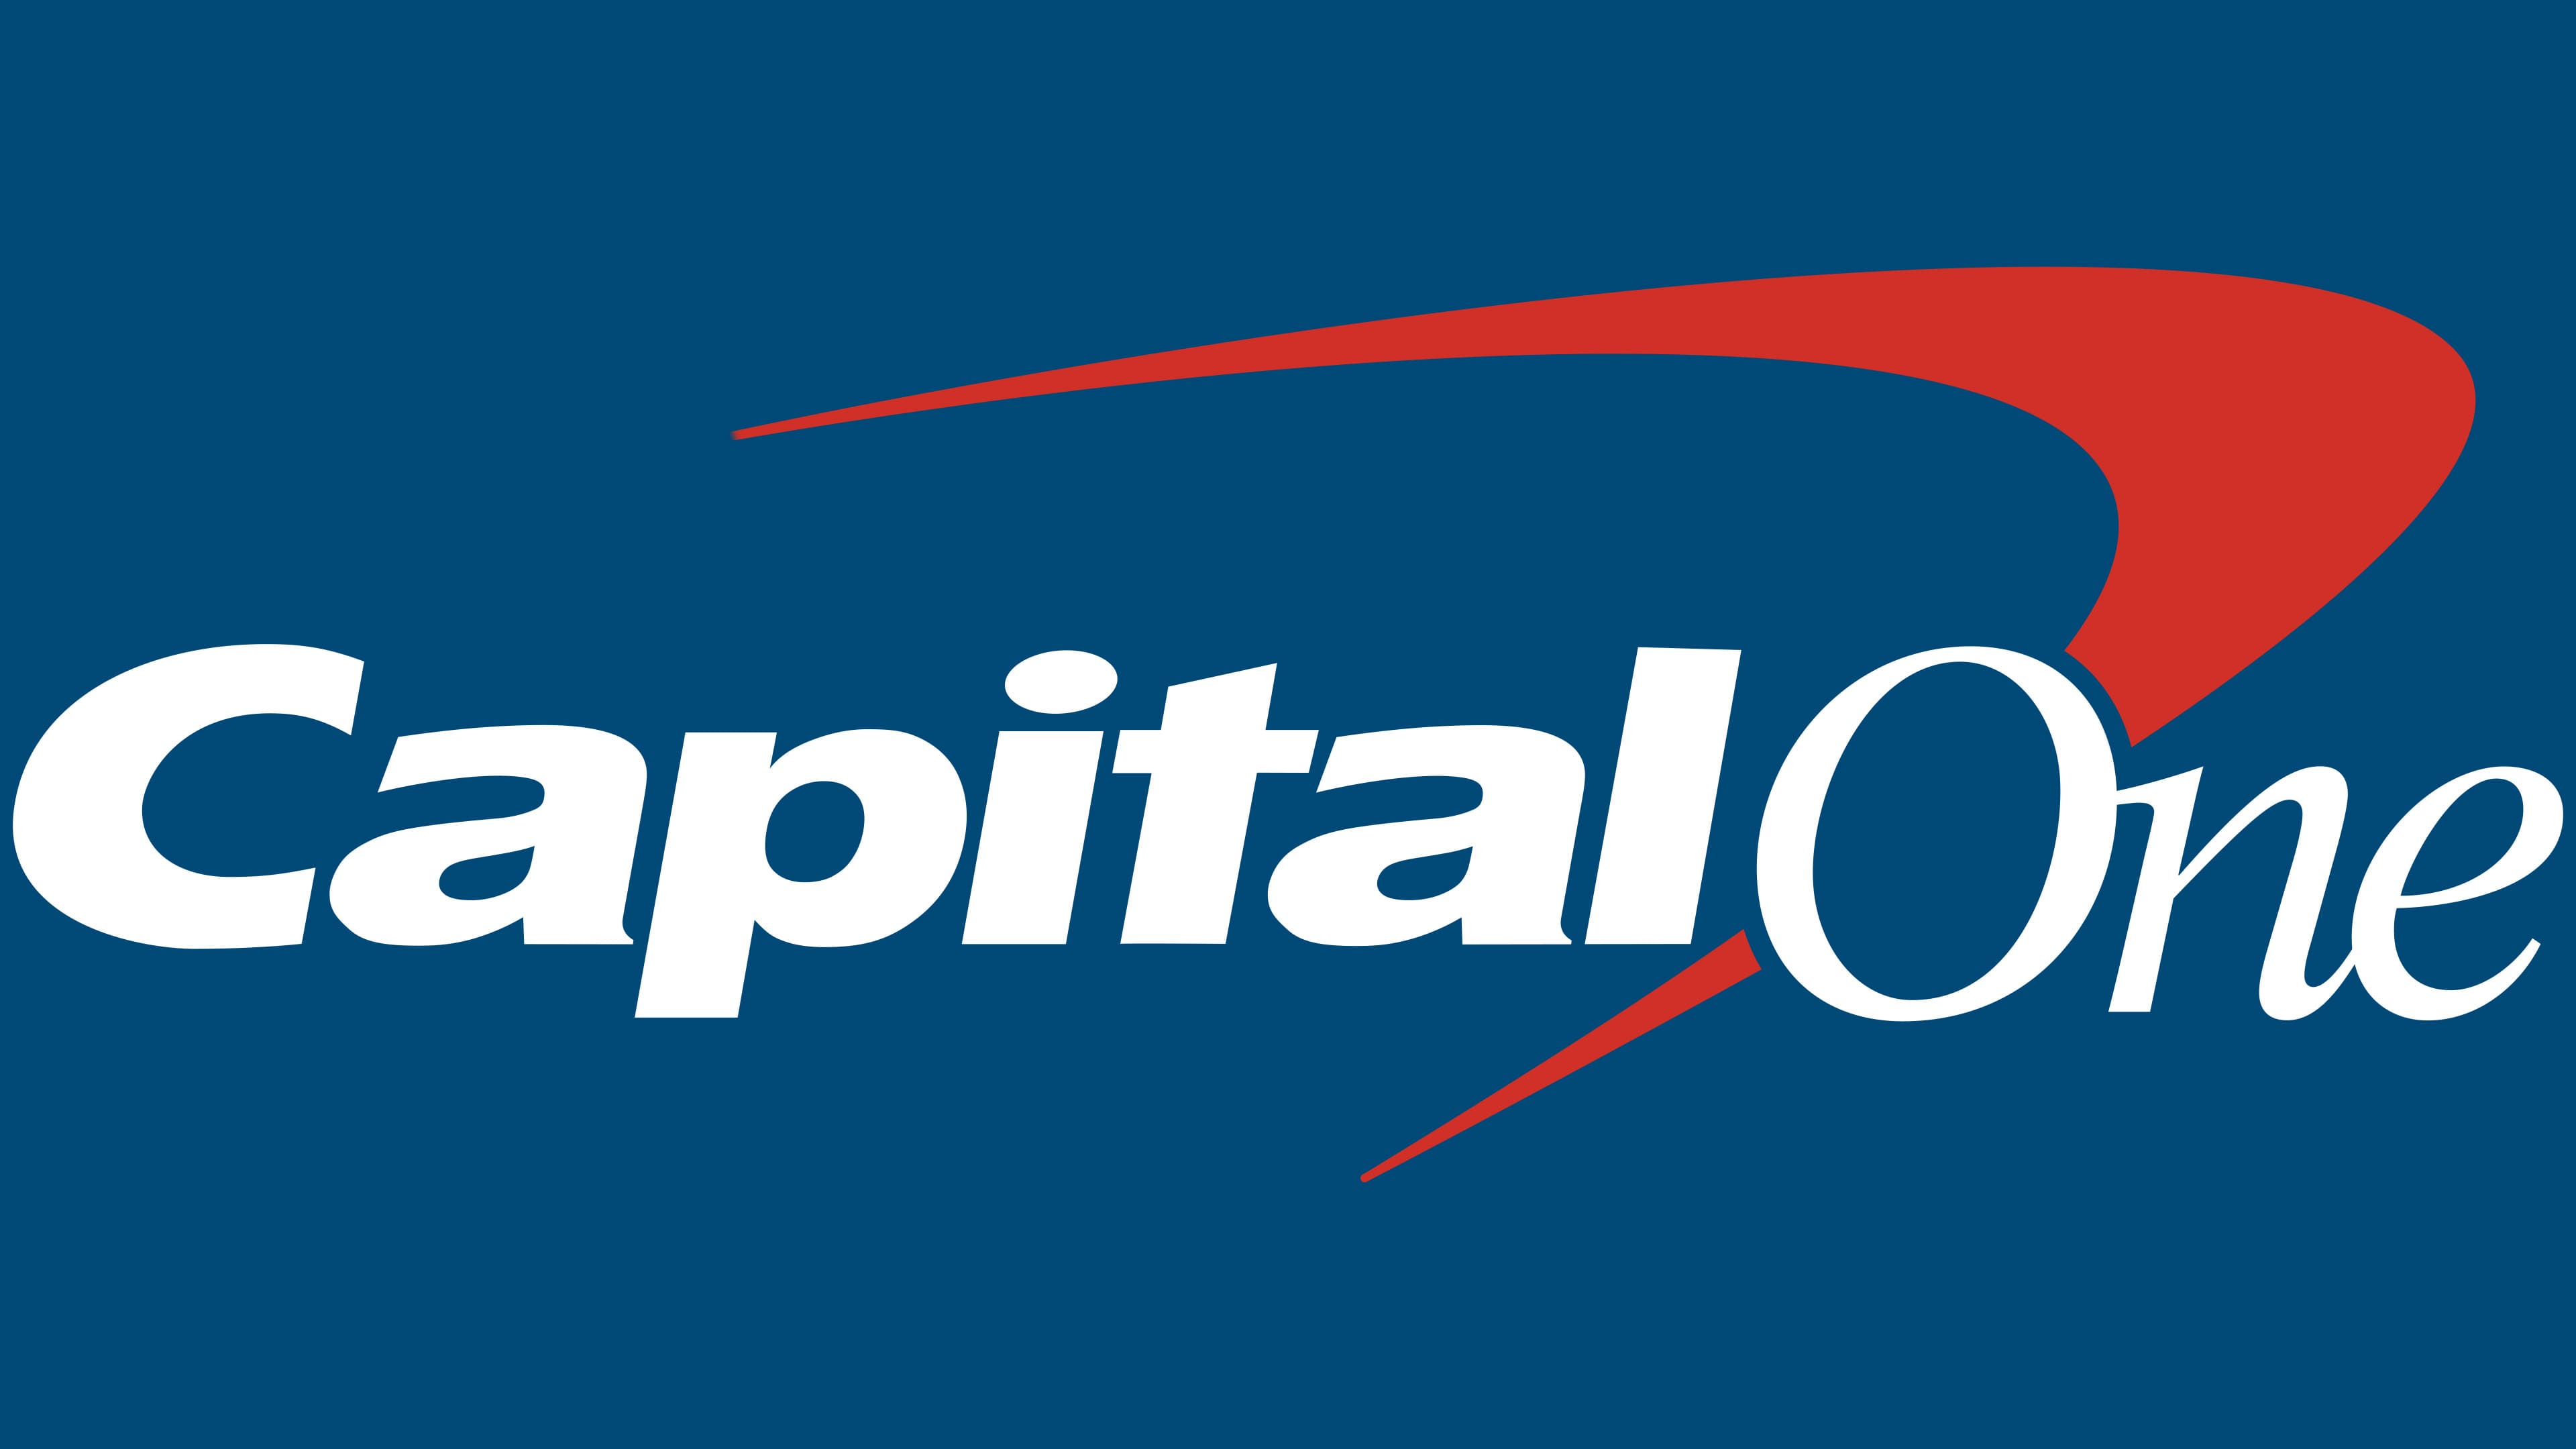 capitol one